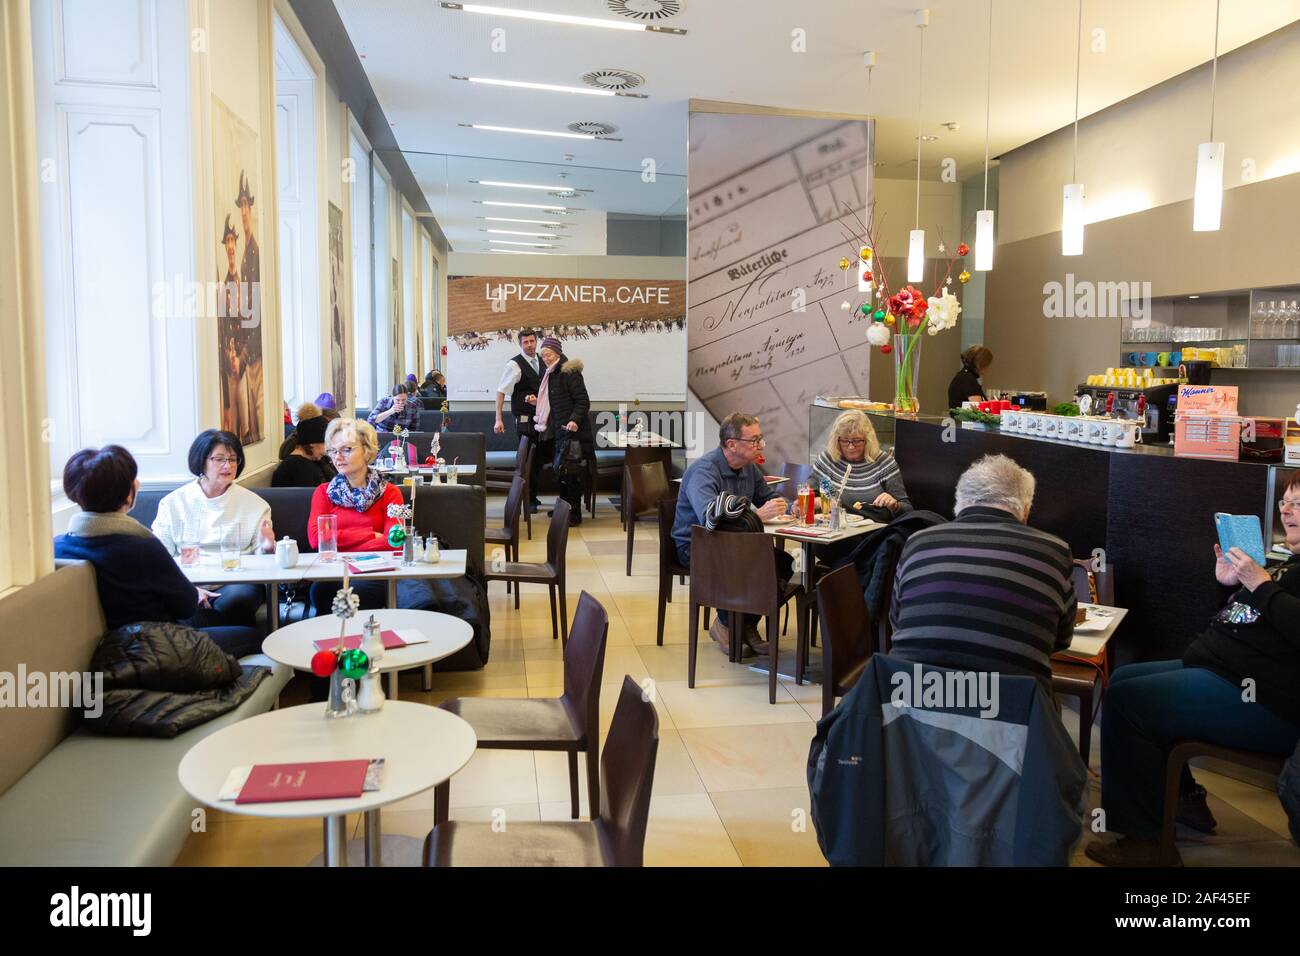 Lipizzaner Cafe Vienna; people sitting eating and drinking in the Lipizzaner cafe, Hofburg palace, Vienna Austria Europe Stock Photo